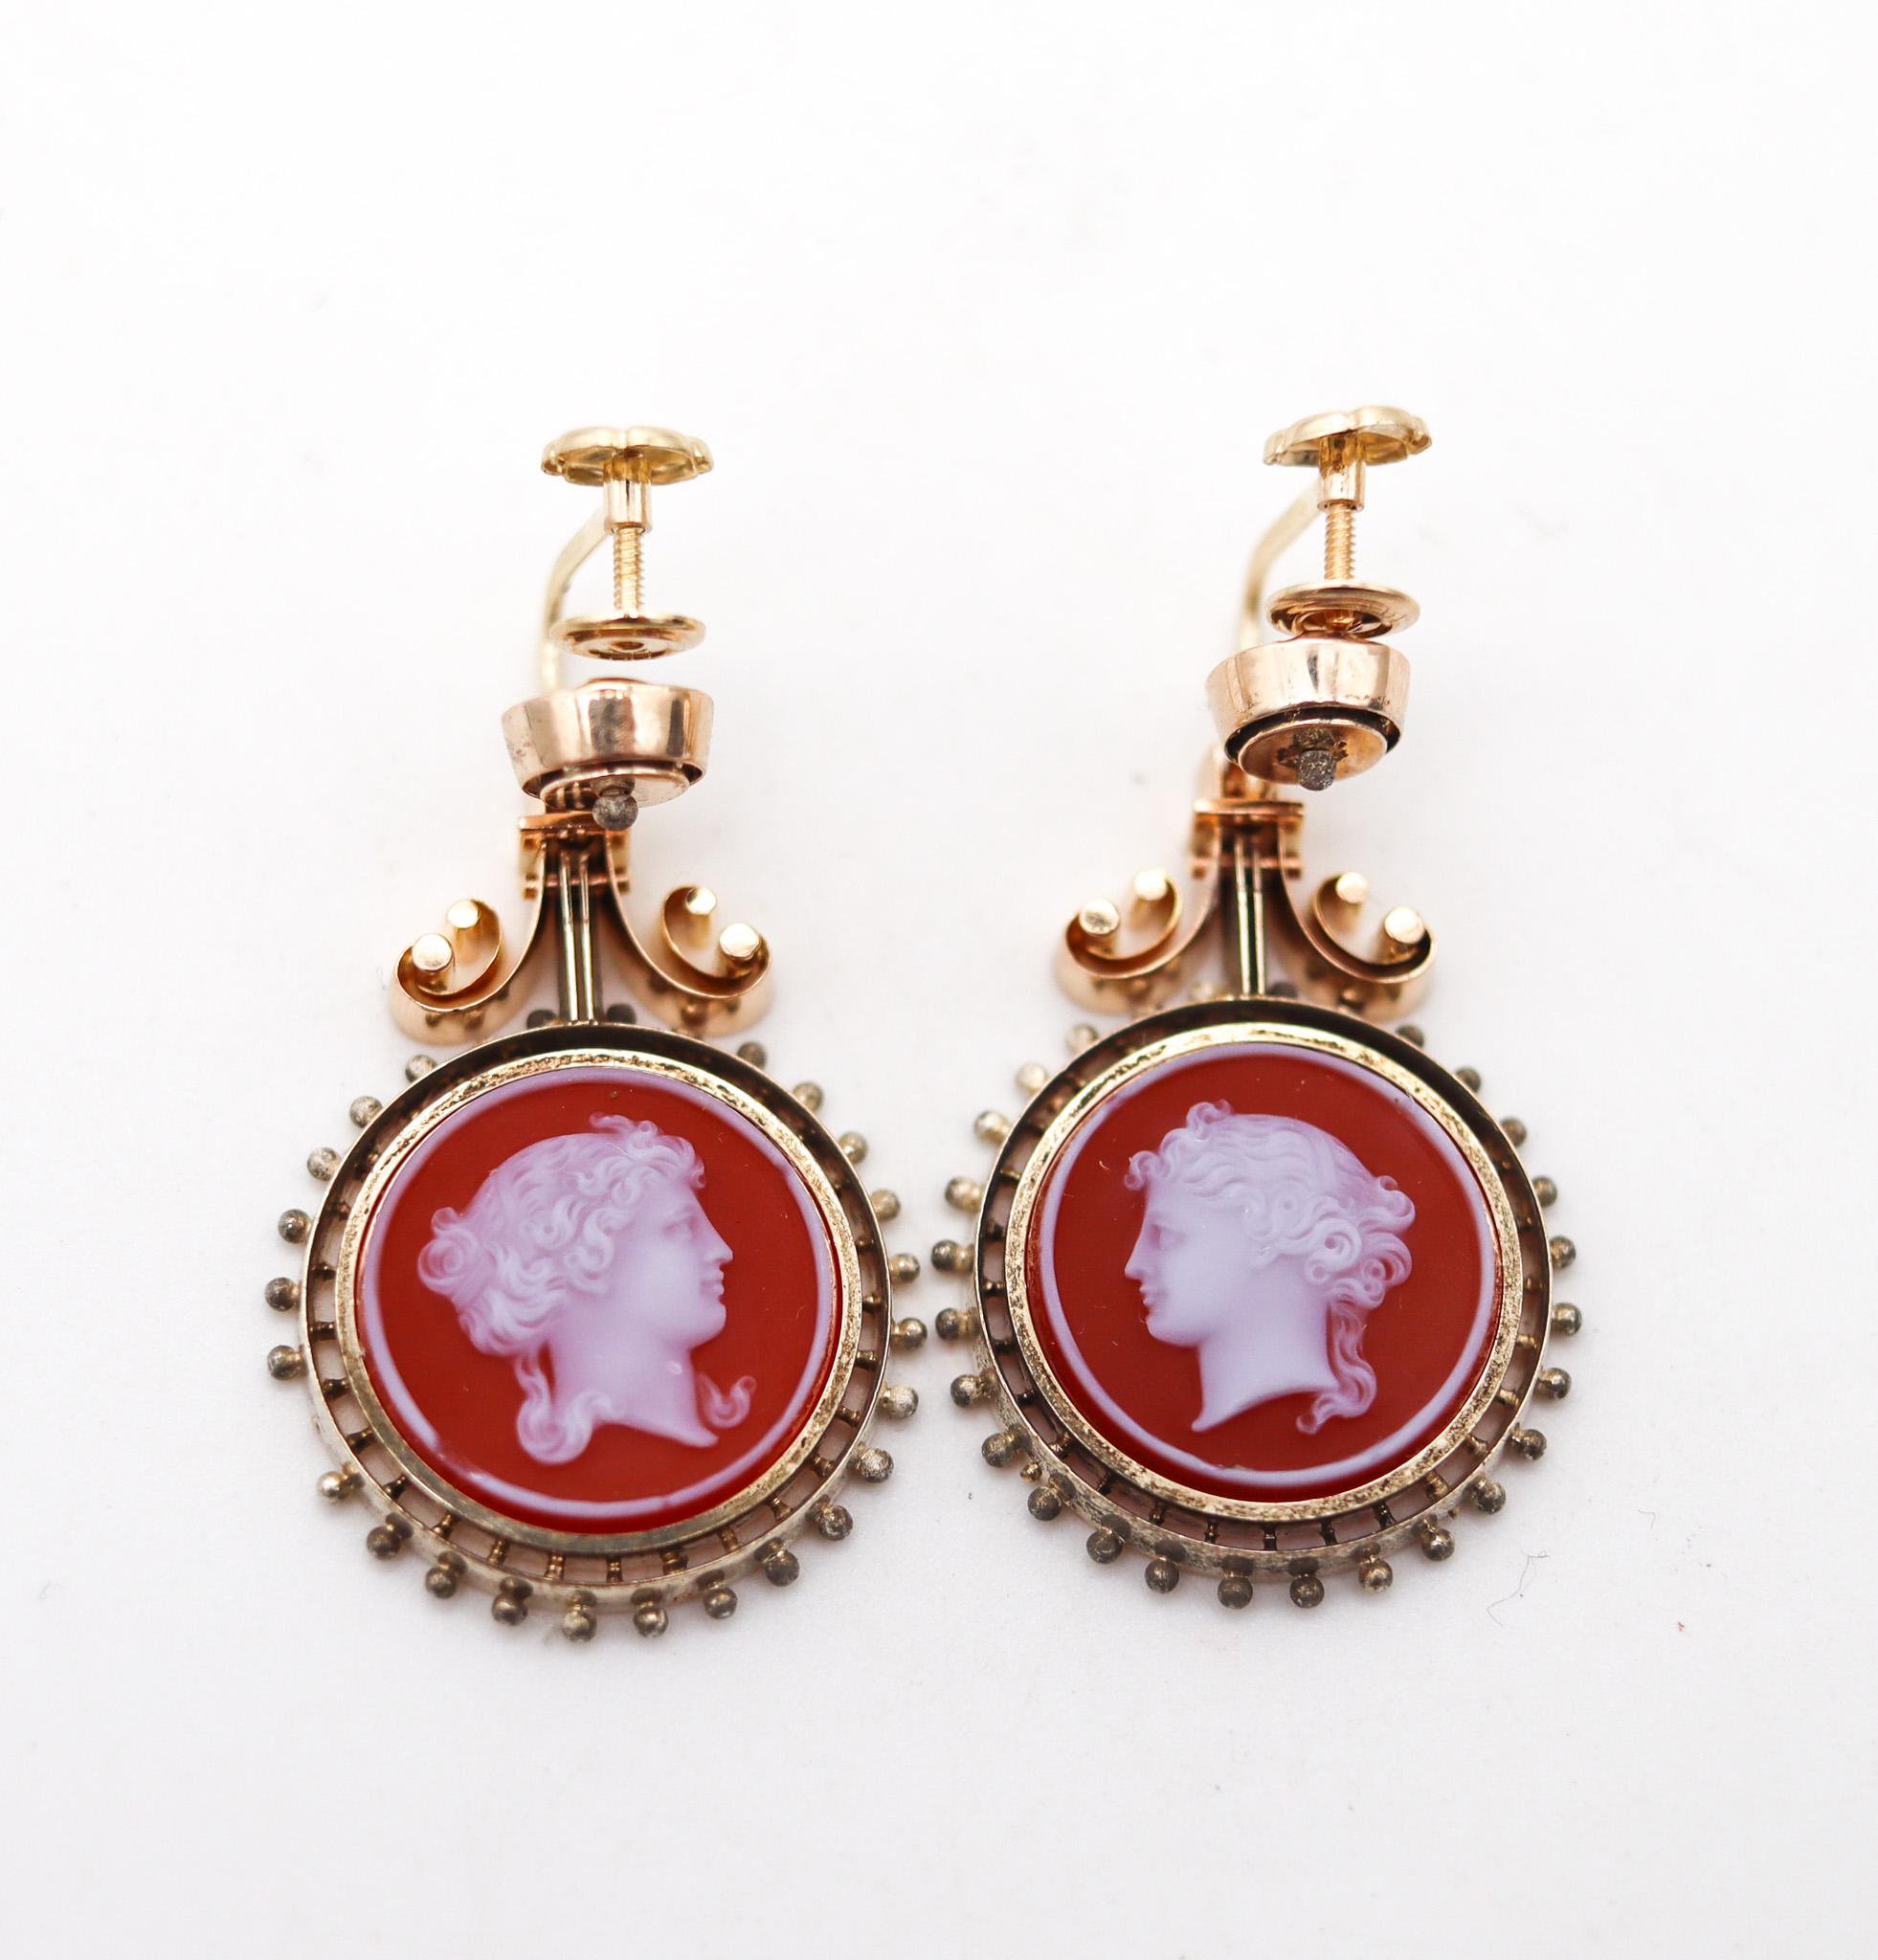 Victorian 1850 Etruscan Revival Dangle Drop Earrings 14Kt Gold & Agates Intaglio In Excellent Condition For Sale In Miami, FL